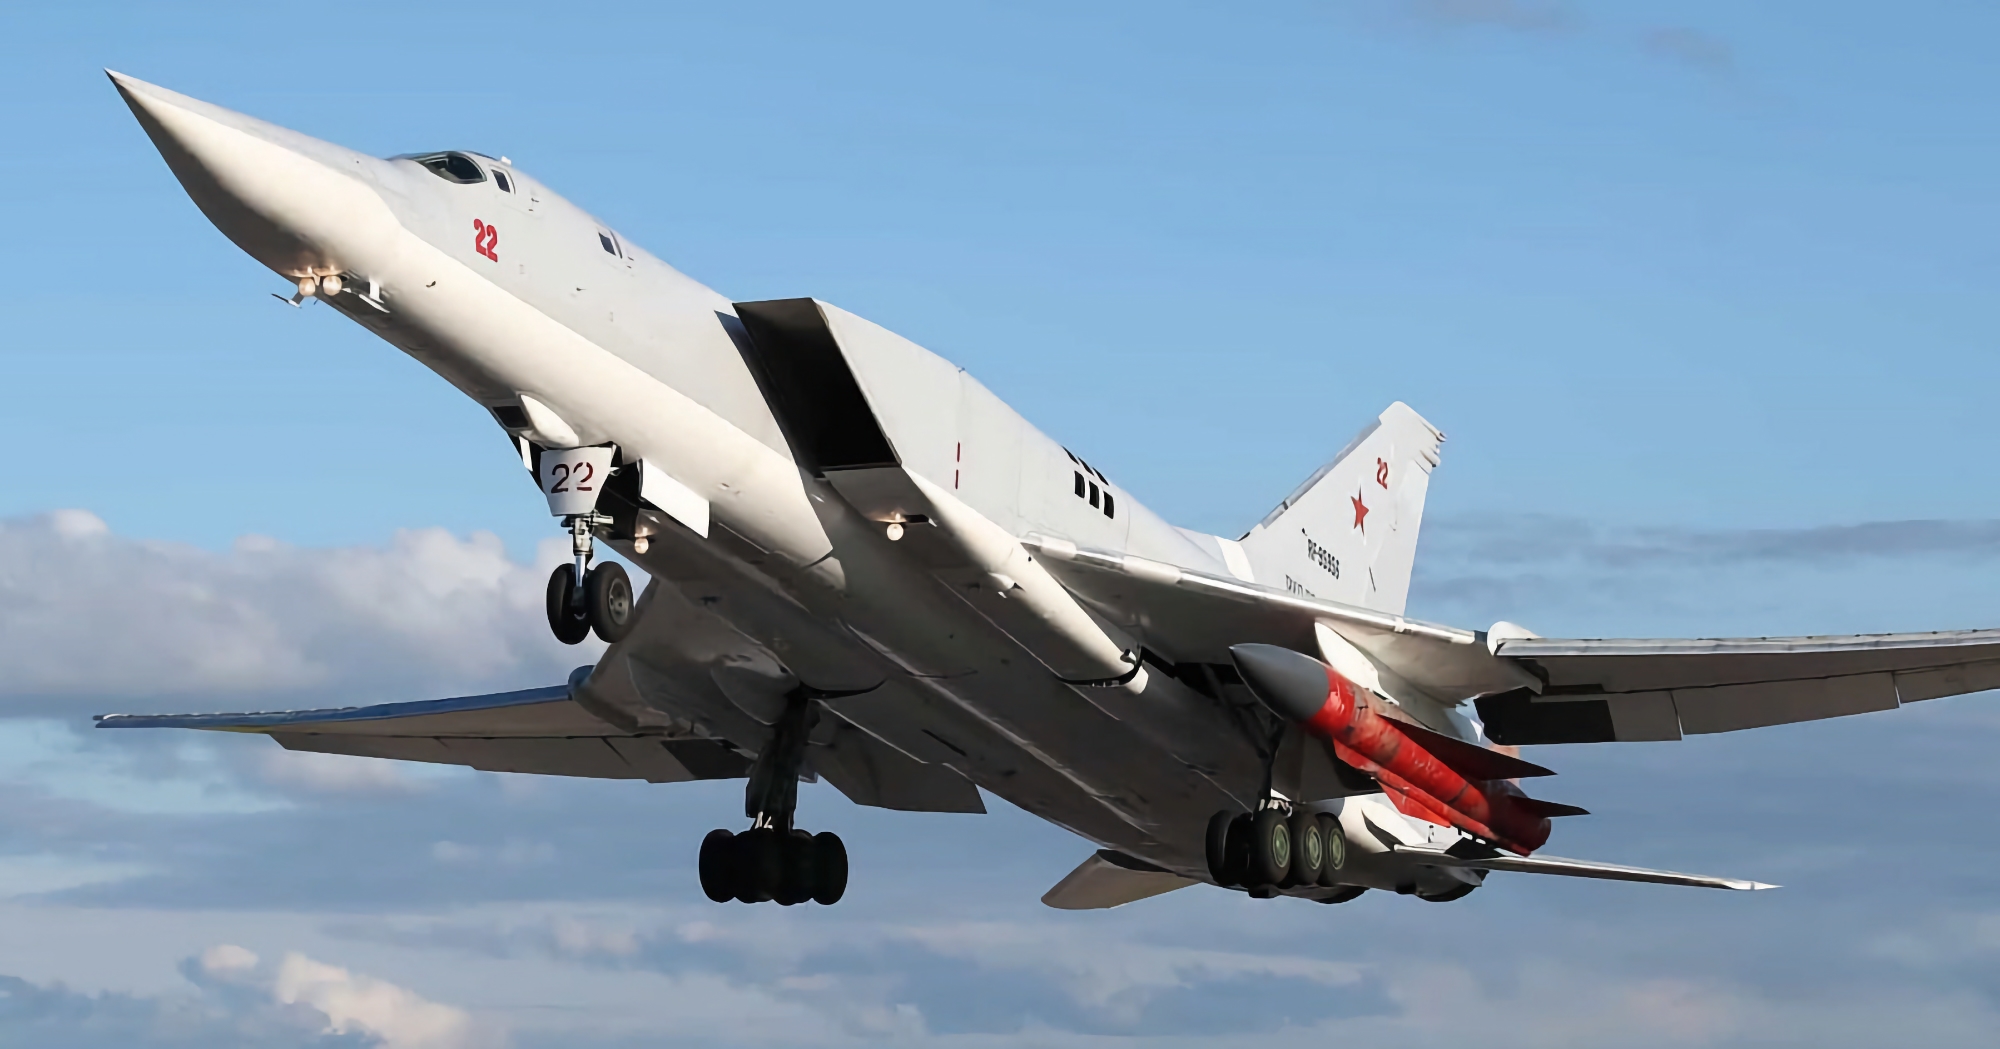 Ukraine's air defence system has for the first time destroyed a Russian Tu-22M3 strategic bomber carrying Kh-22 cruise missiles